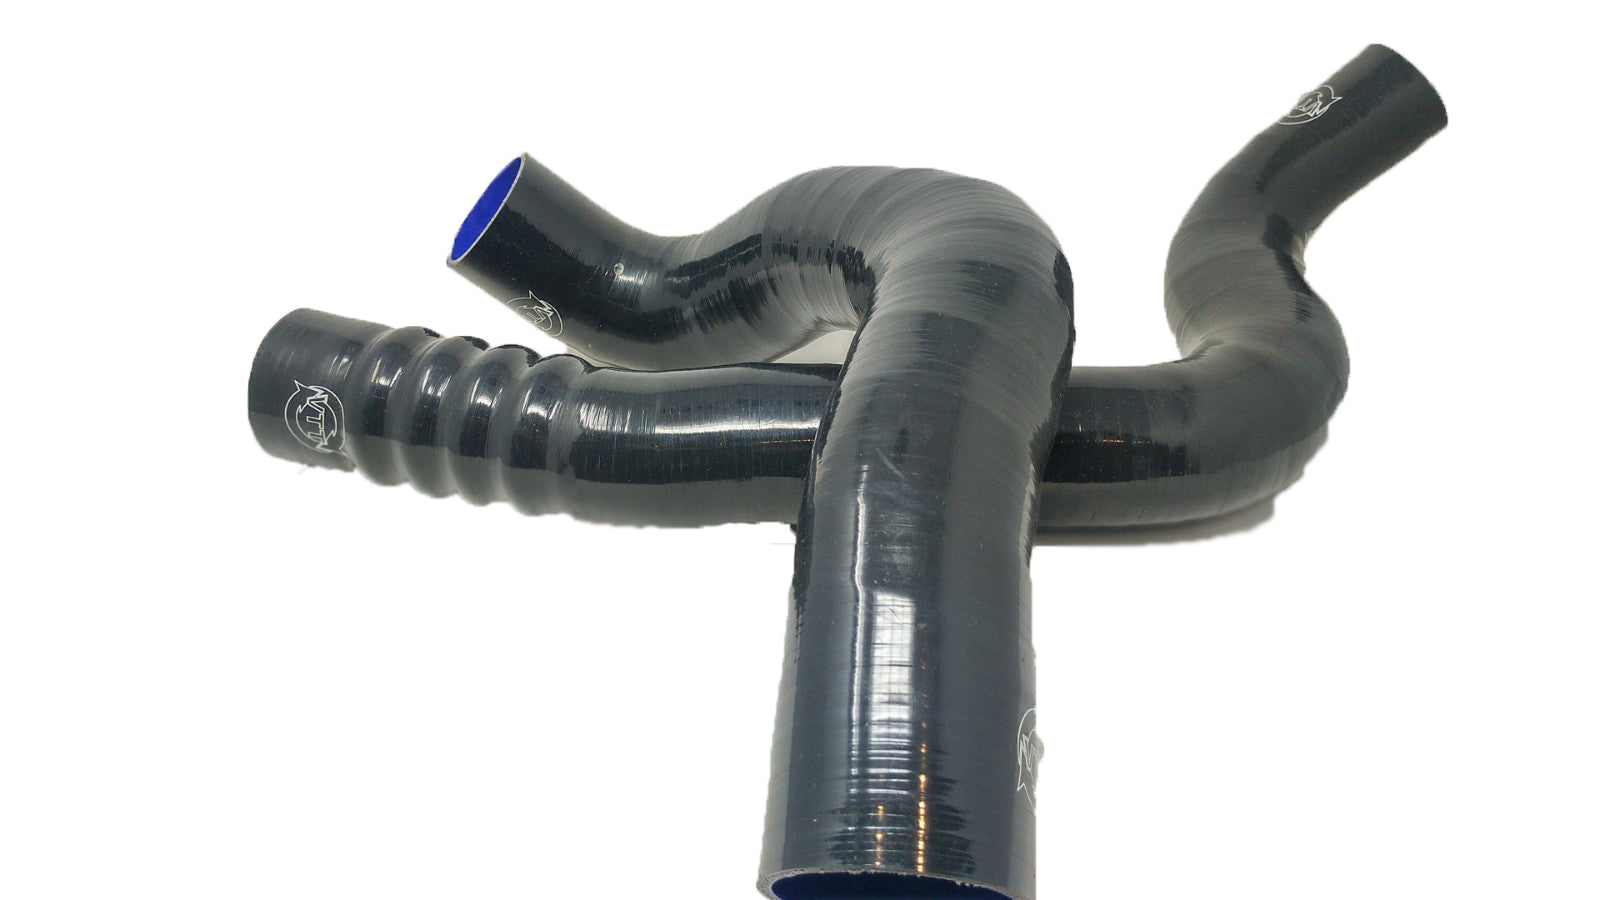 VTT 8V RS3/8S TTRS Silicone Charge pipes